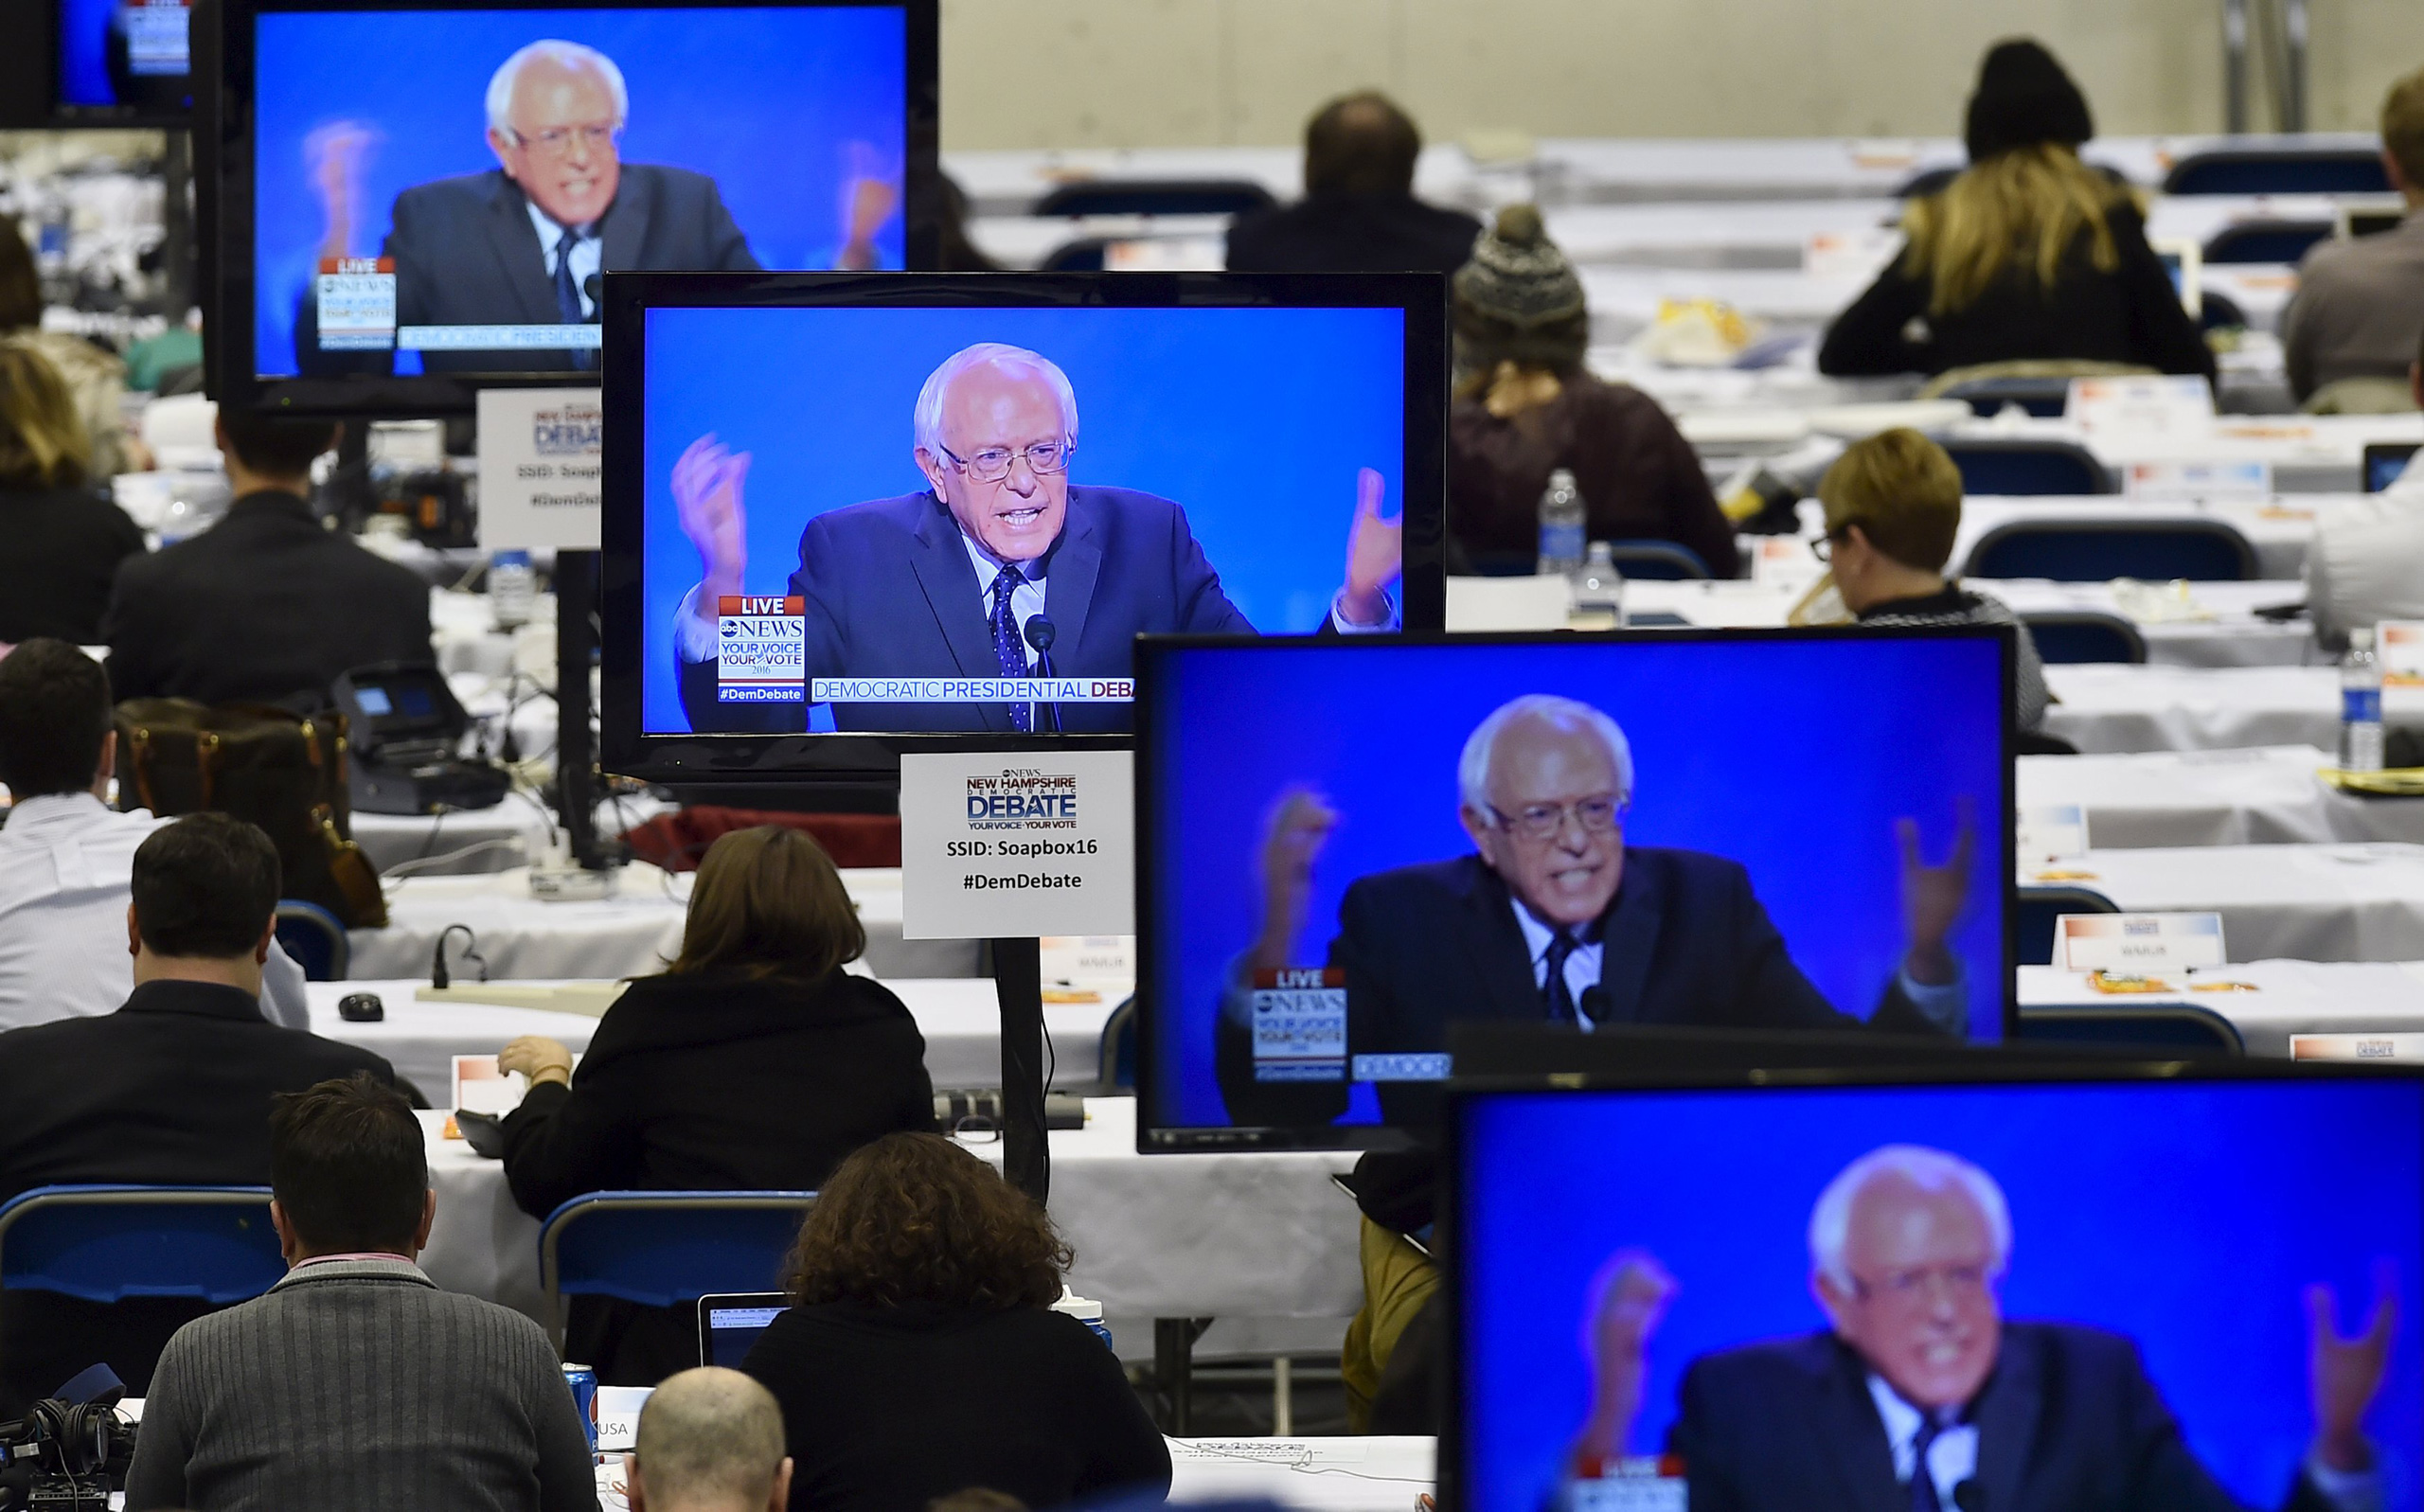 U.S. Democratic presidential candidate Bernie Sanders appears on television screens in the media work-room during the Democratic presidential candidates debate at Saint Anselm College in Manchester, New Hampshire December 19, 2015.      REUTERS/Gretchen Ertl      TPX IMAGES OF THE DAY